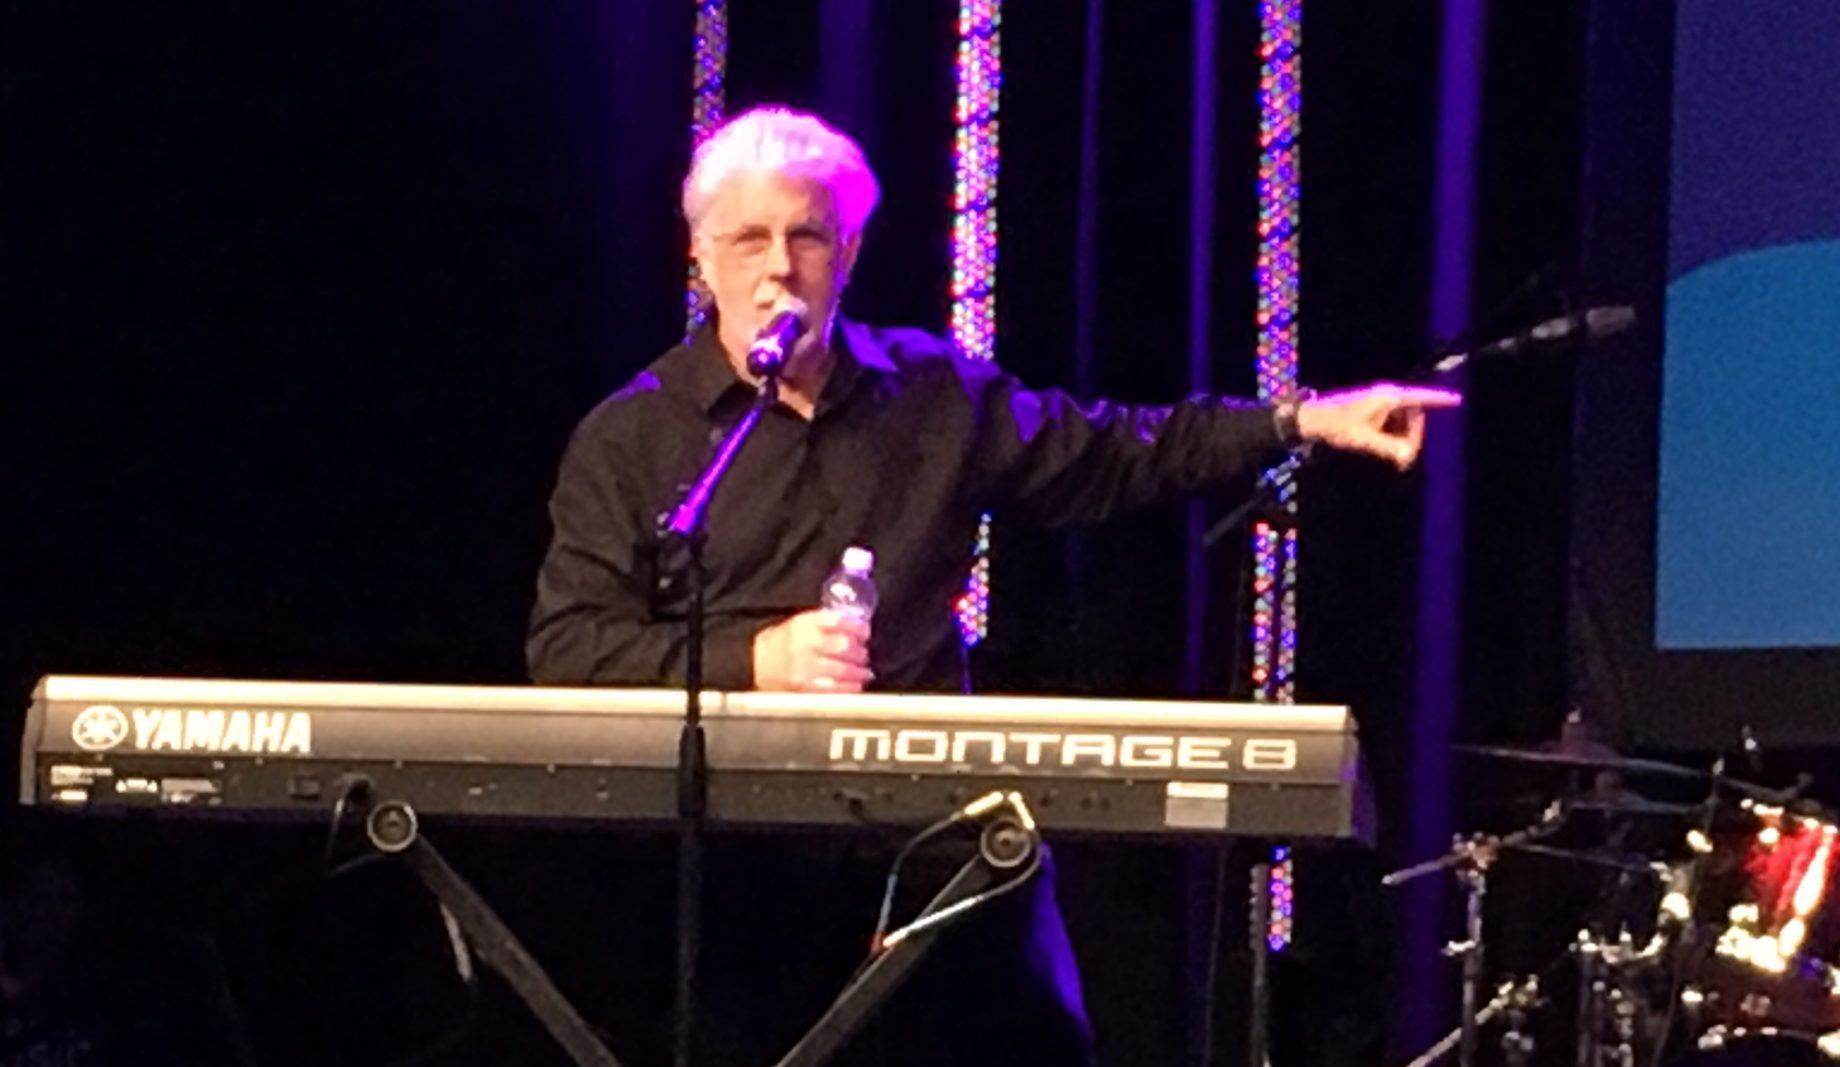 Michael McDonald launches ASCAP EXPO with Doobie Brothers tunes - Photo © 2017 Donna Balancia